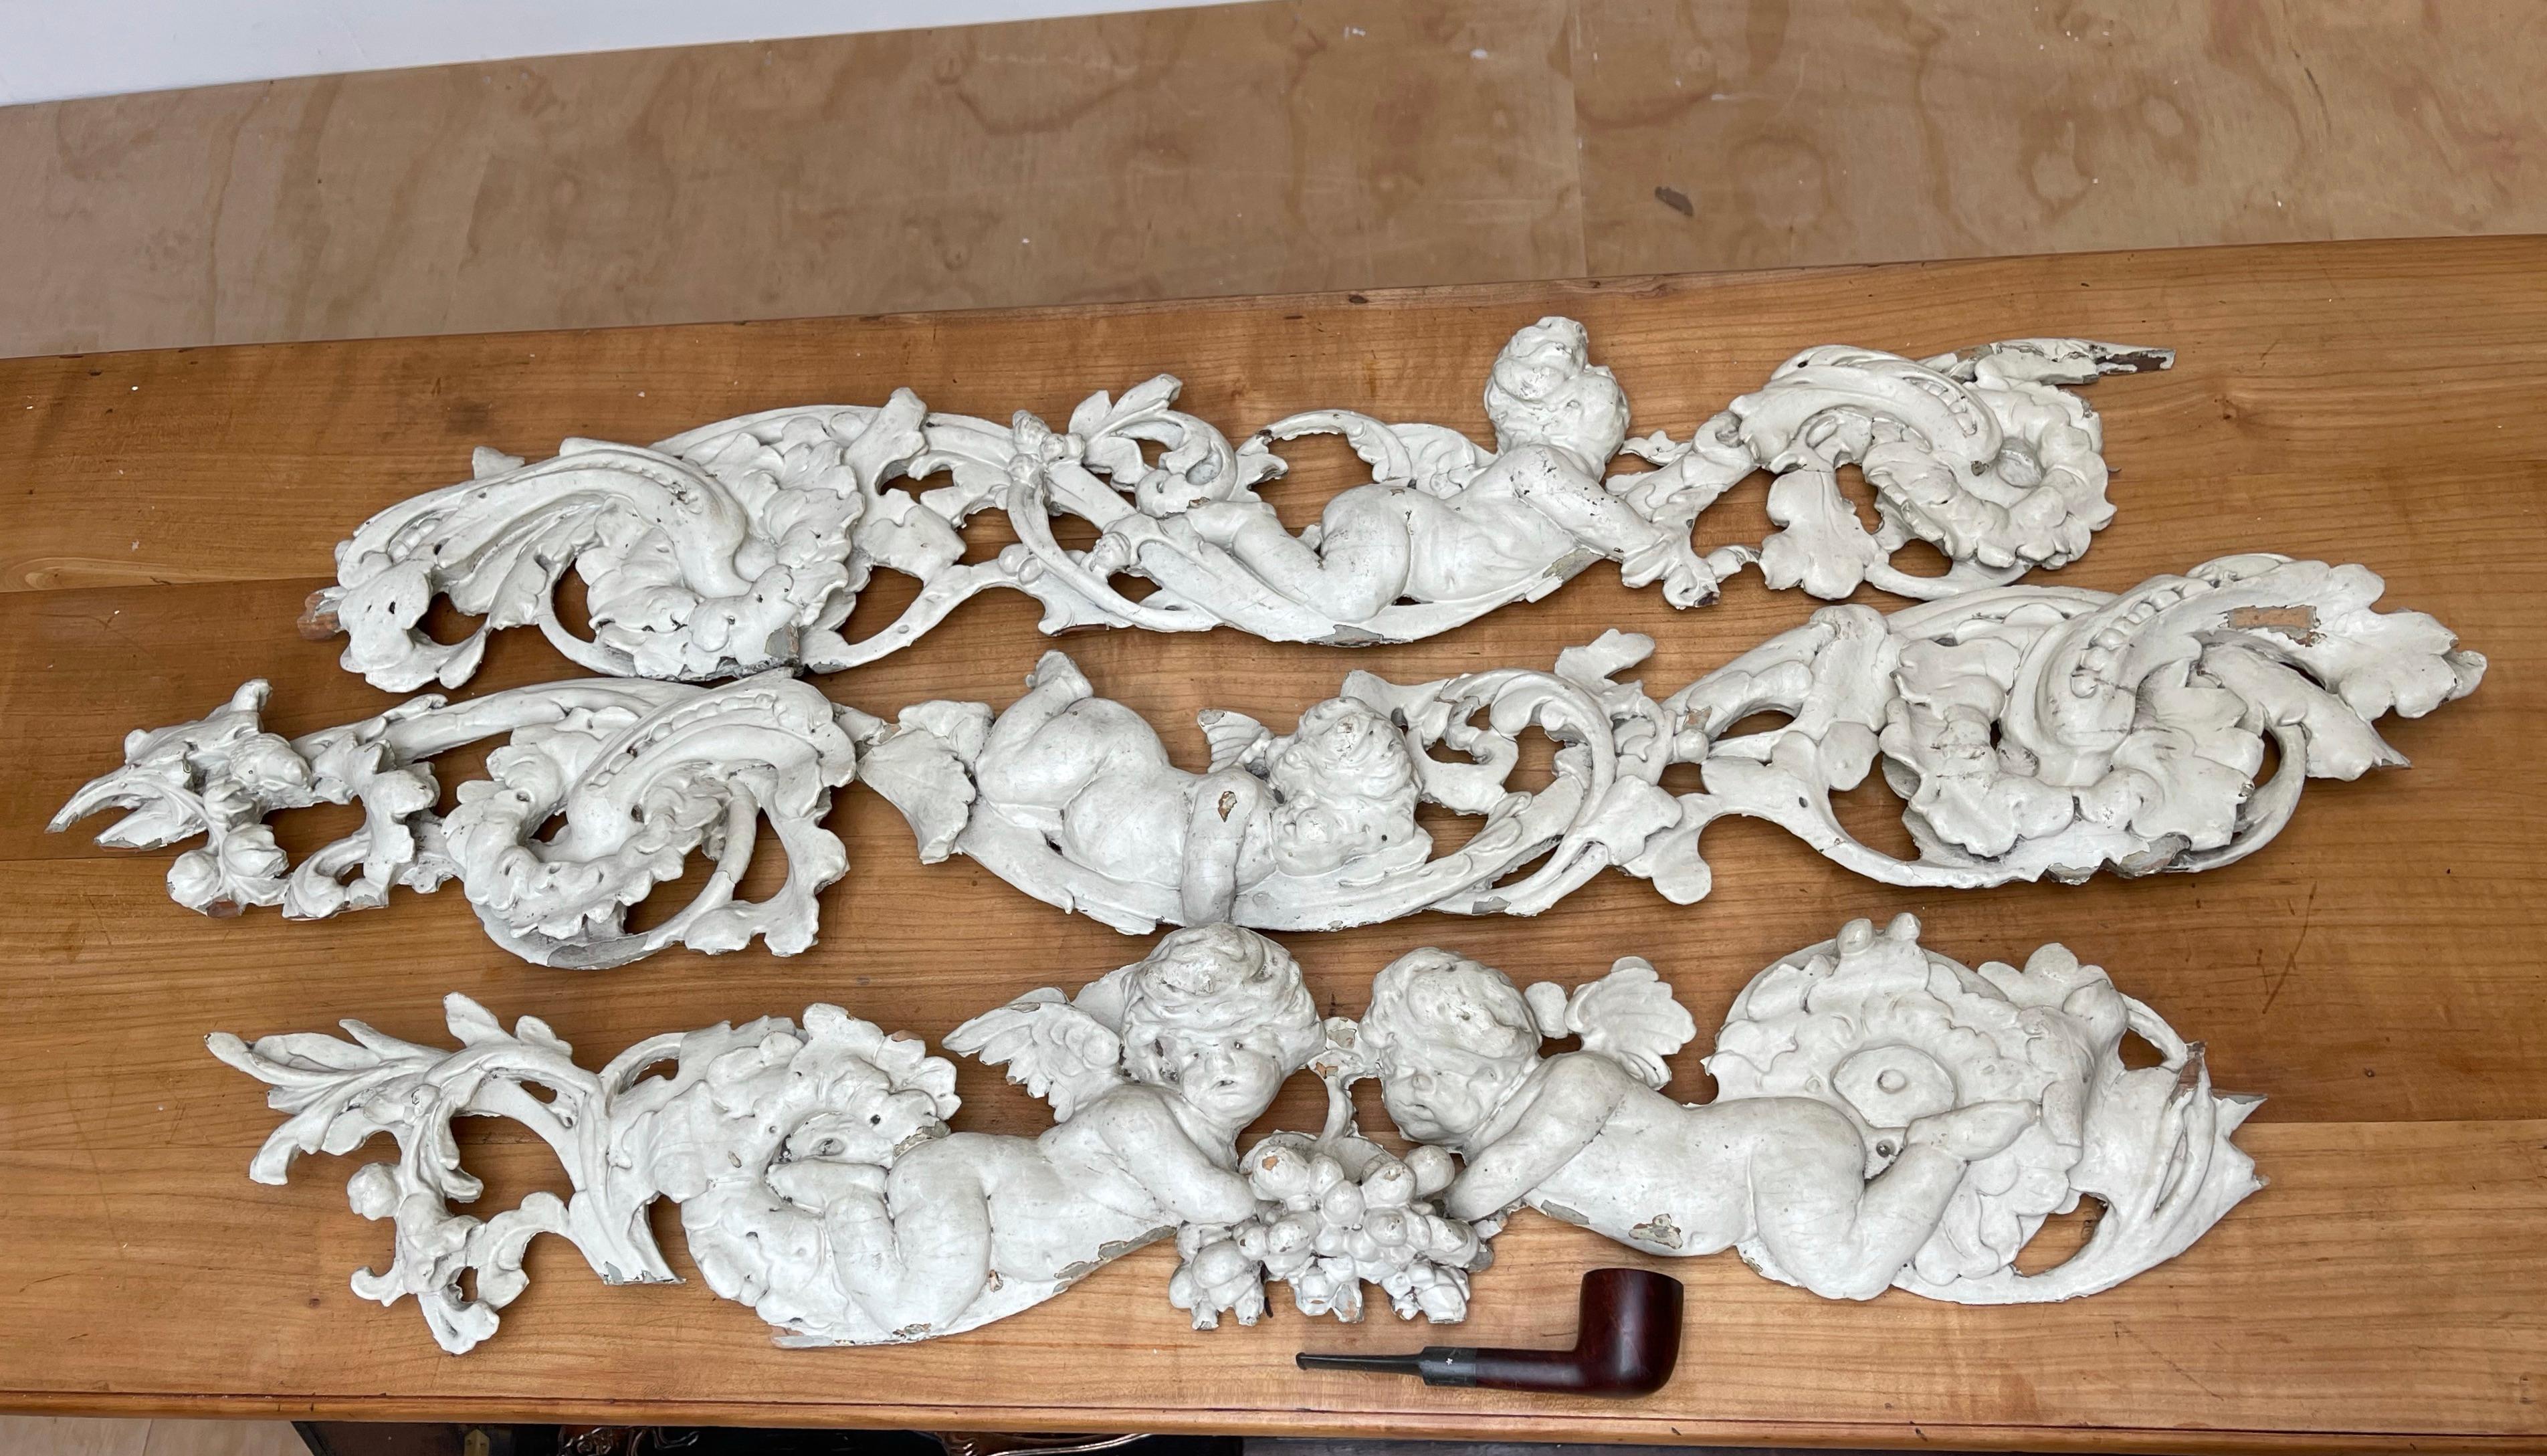 European Rare Hand Carved Baroque Architectural Wall or Ceiling Cherubs Sculptures 9 Feet For Sale